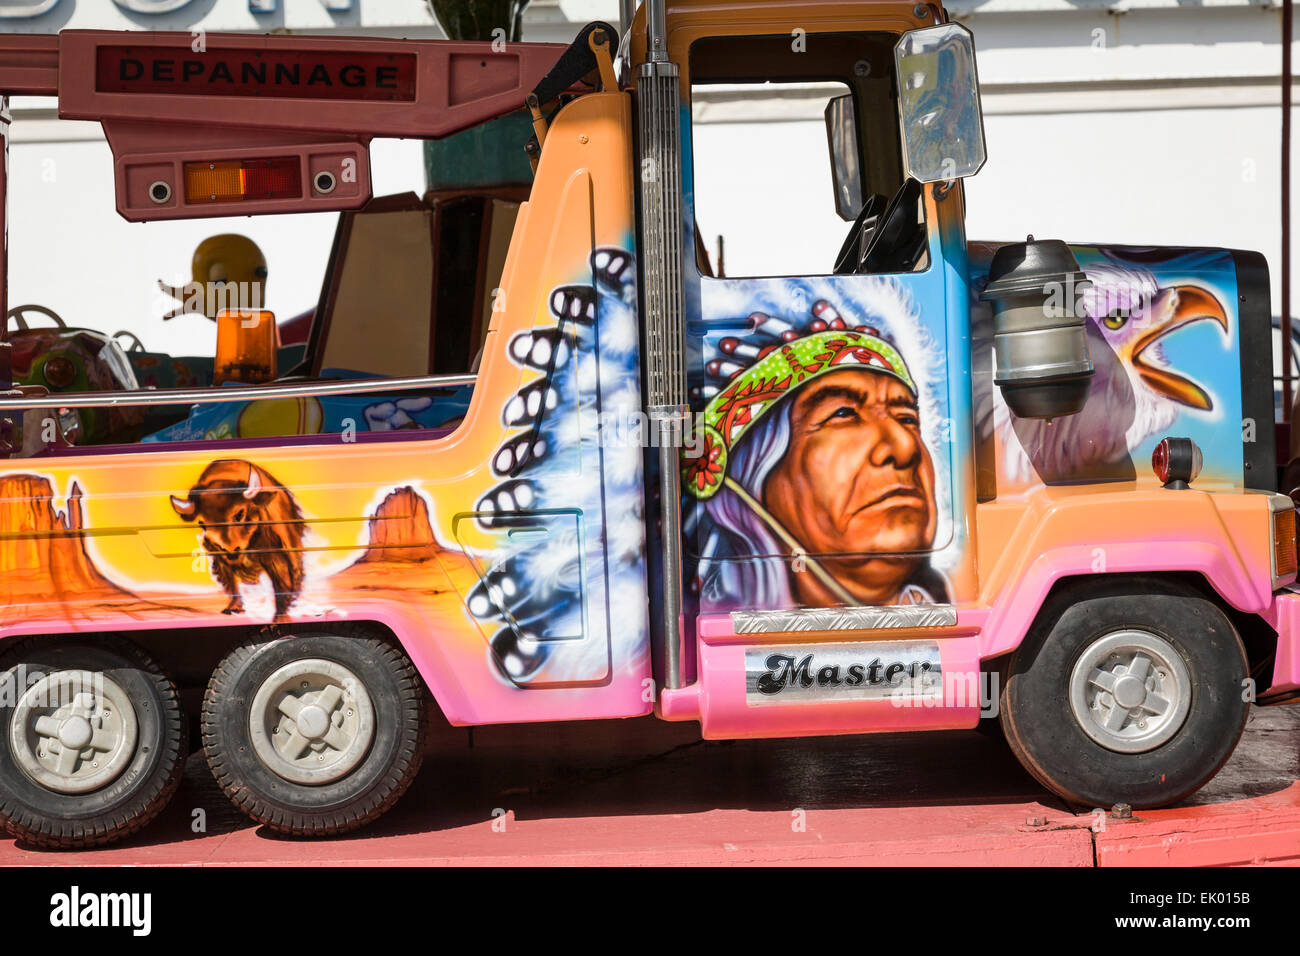 Close-up of a fairground ride truck with colourful native American imagery. Stock Photo